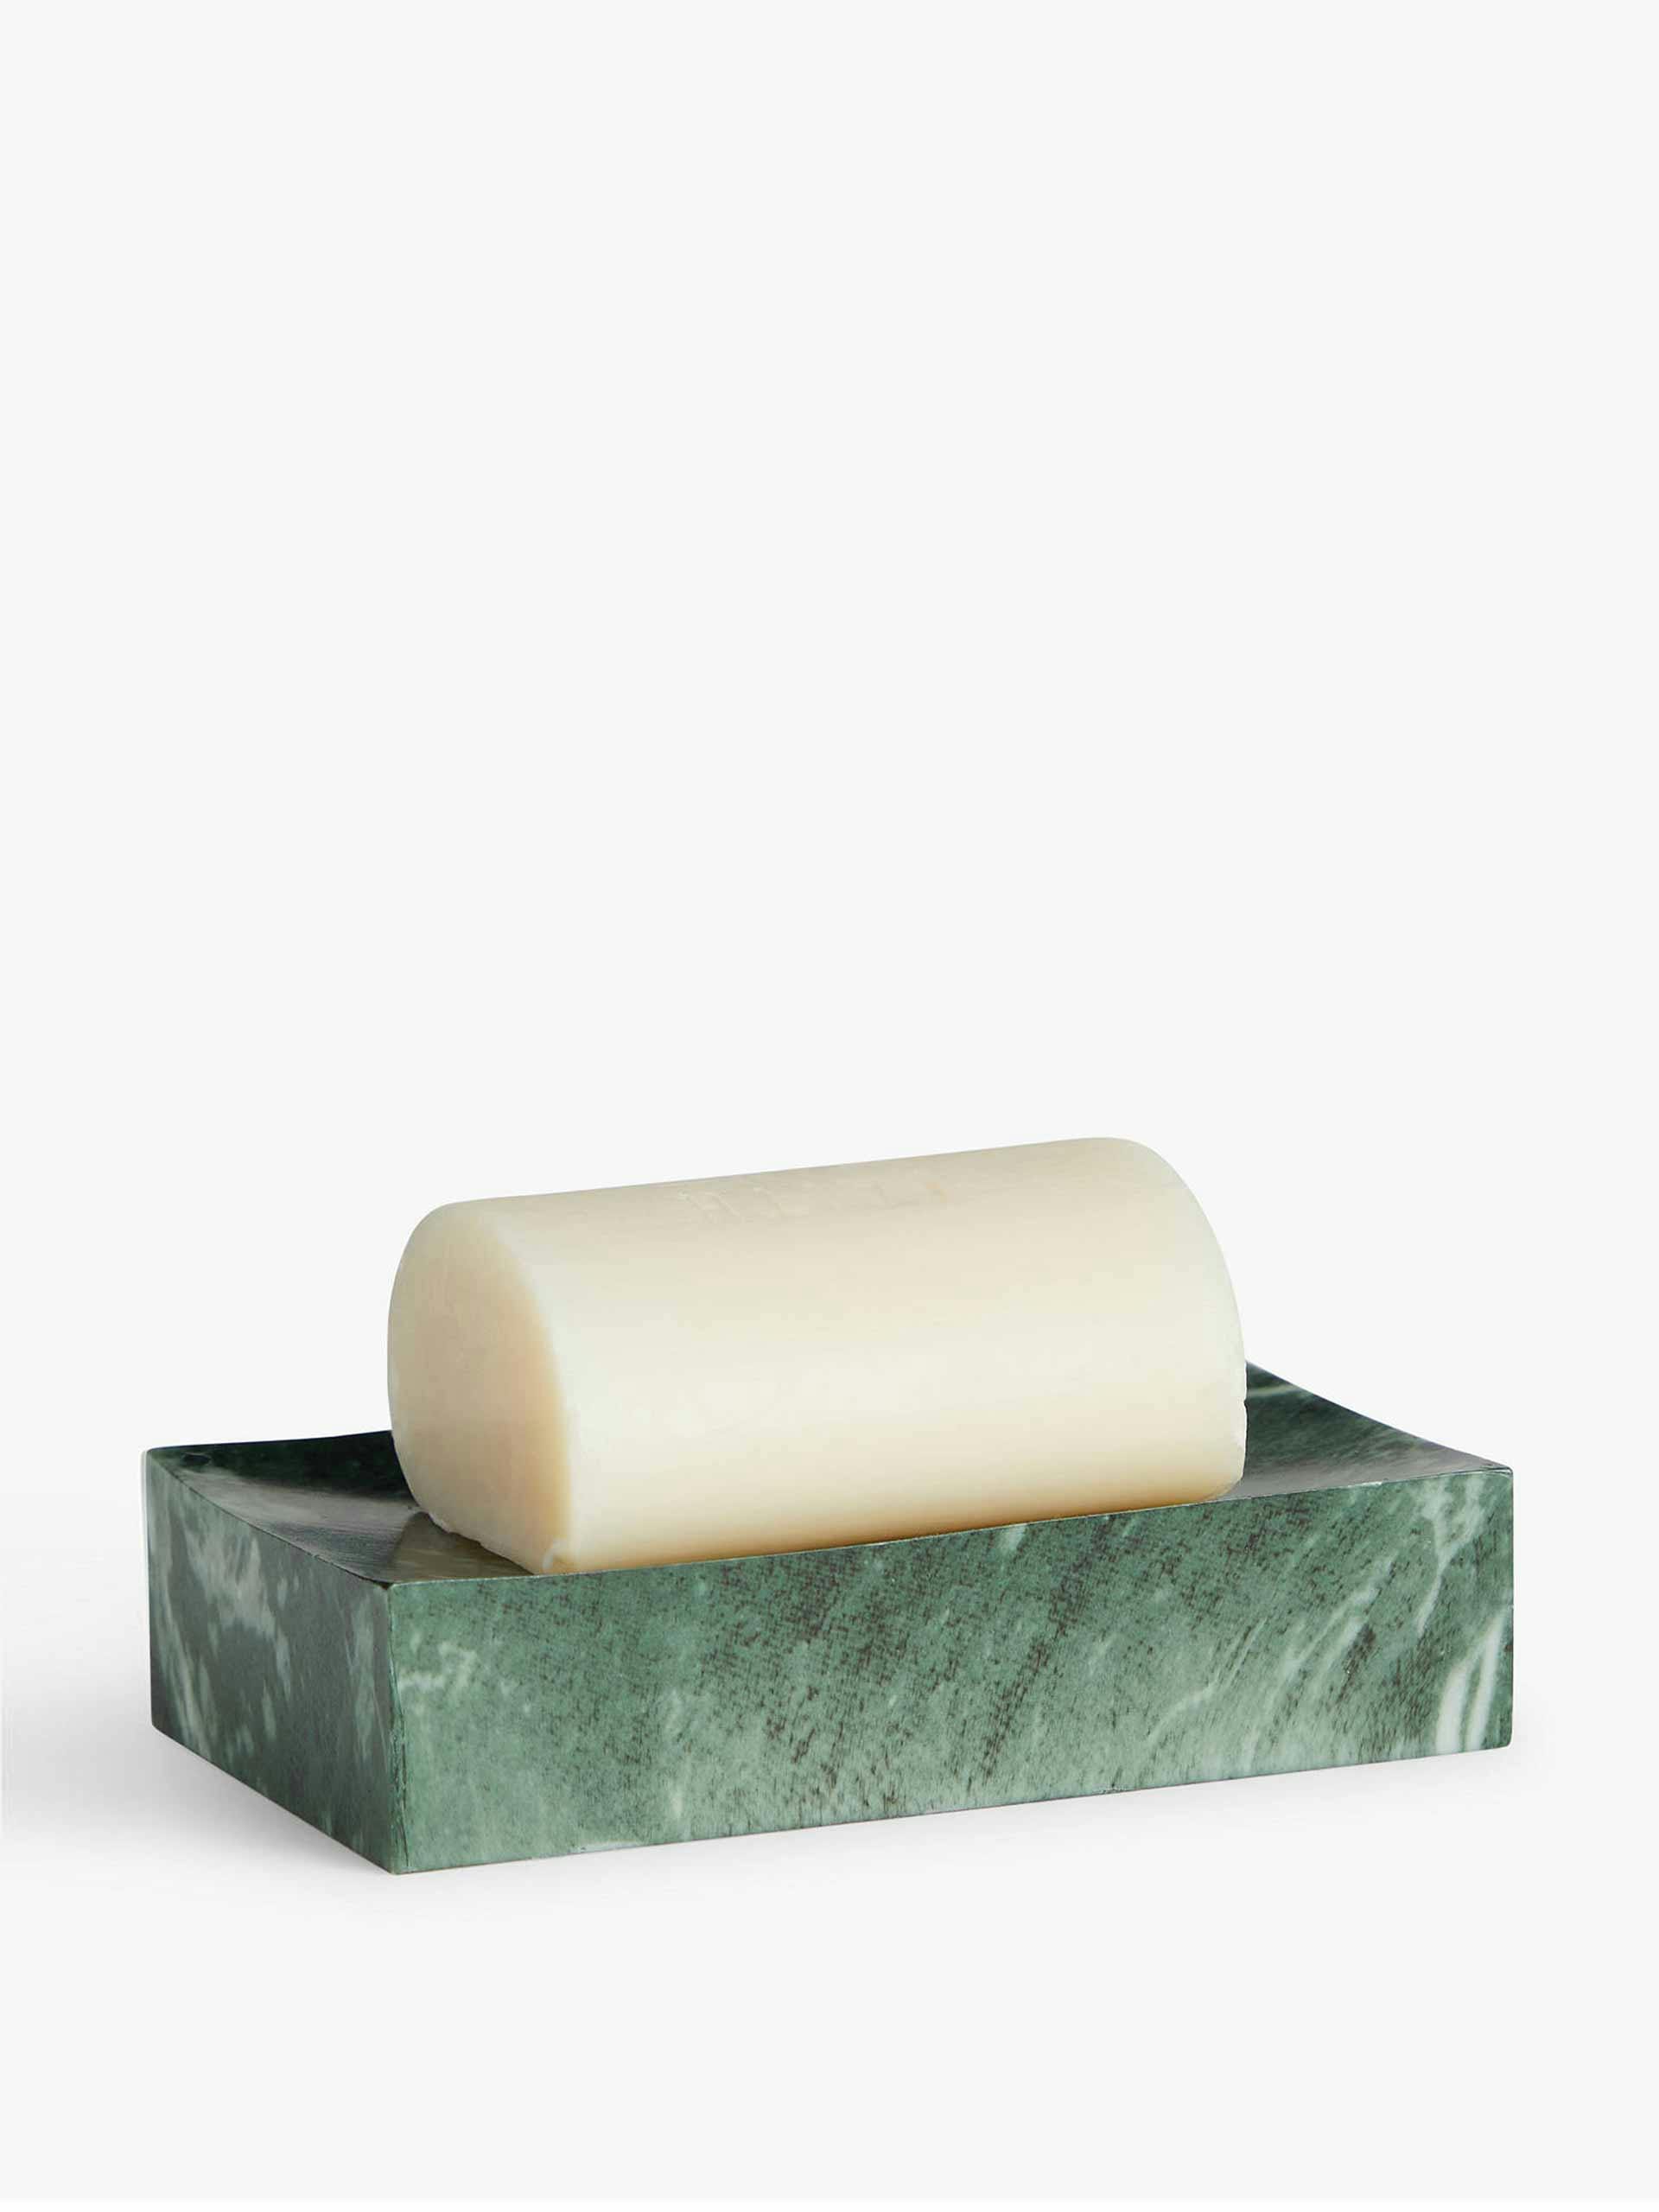 Green marble soap dish